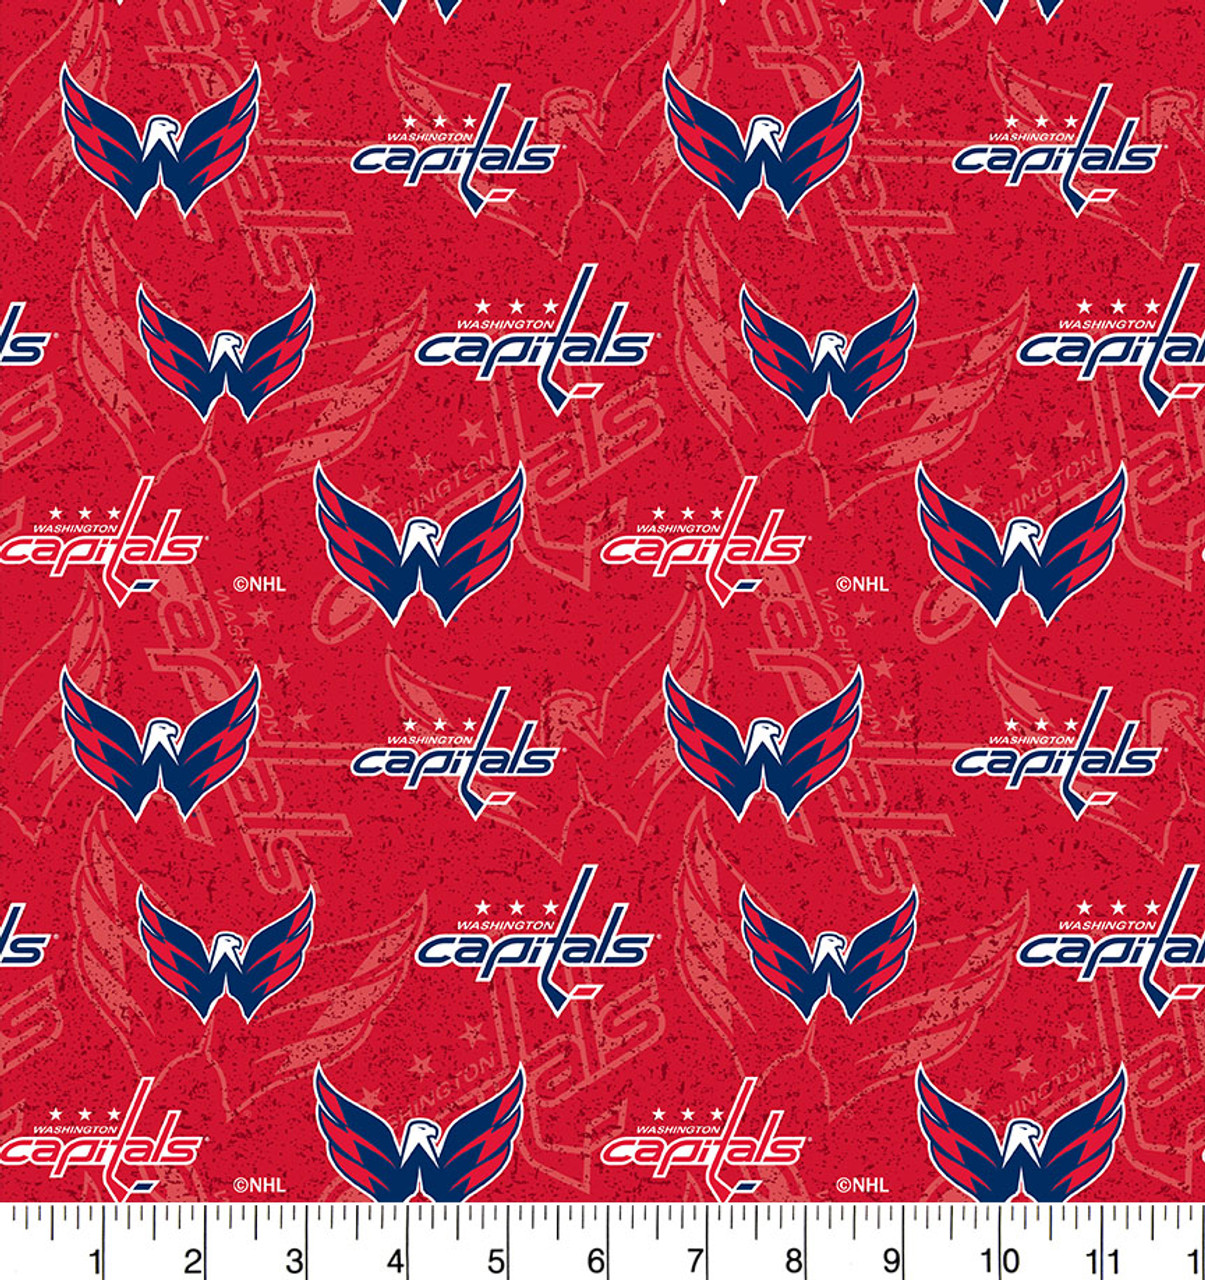 Washington Capitals Cotton Fabric with Tone on Tone Print and Matching Solid Cotton Fabrics